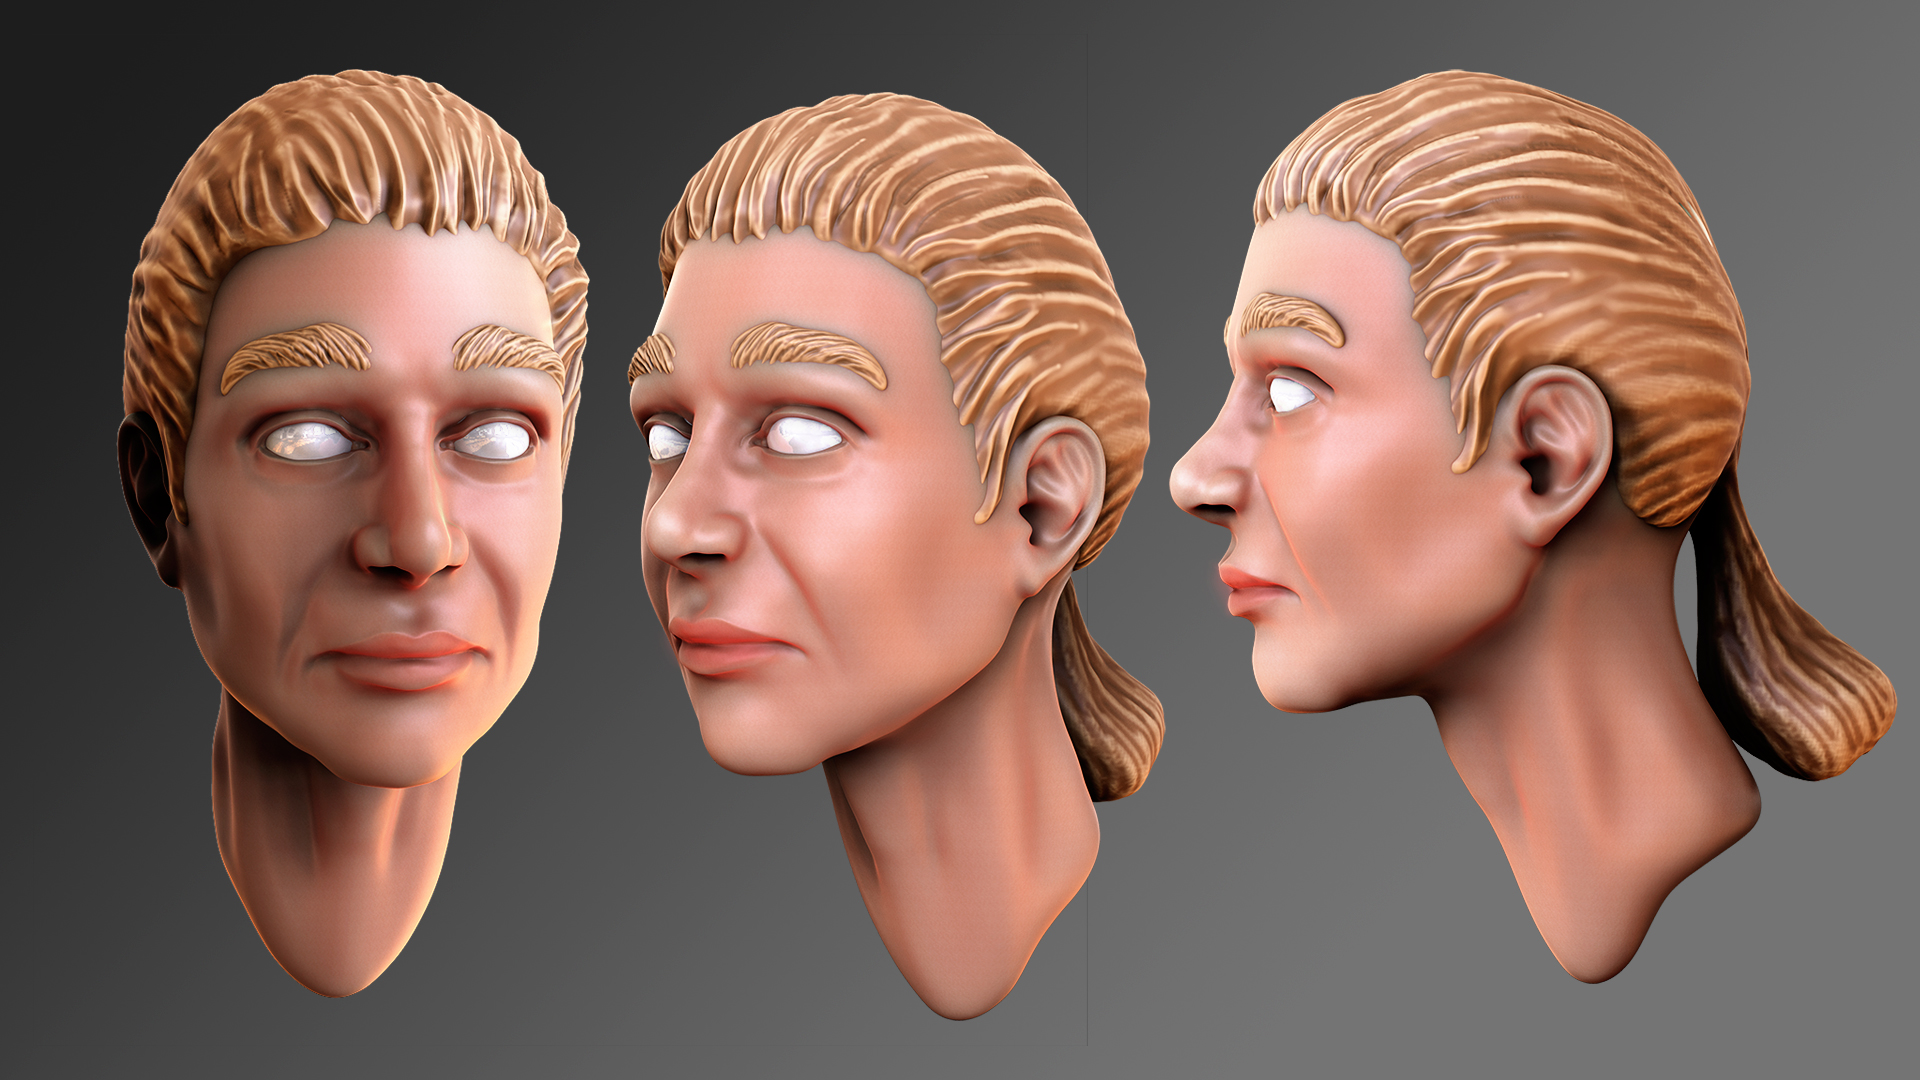 zbrush character sculpting projects tips & techniques from the masters2012